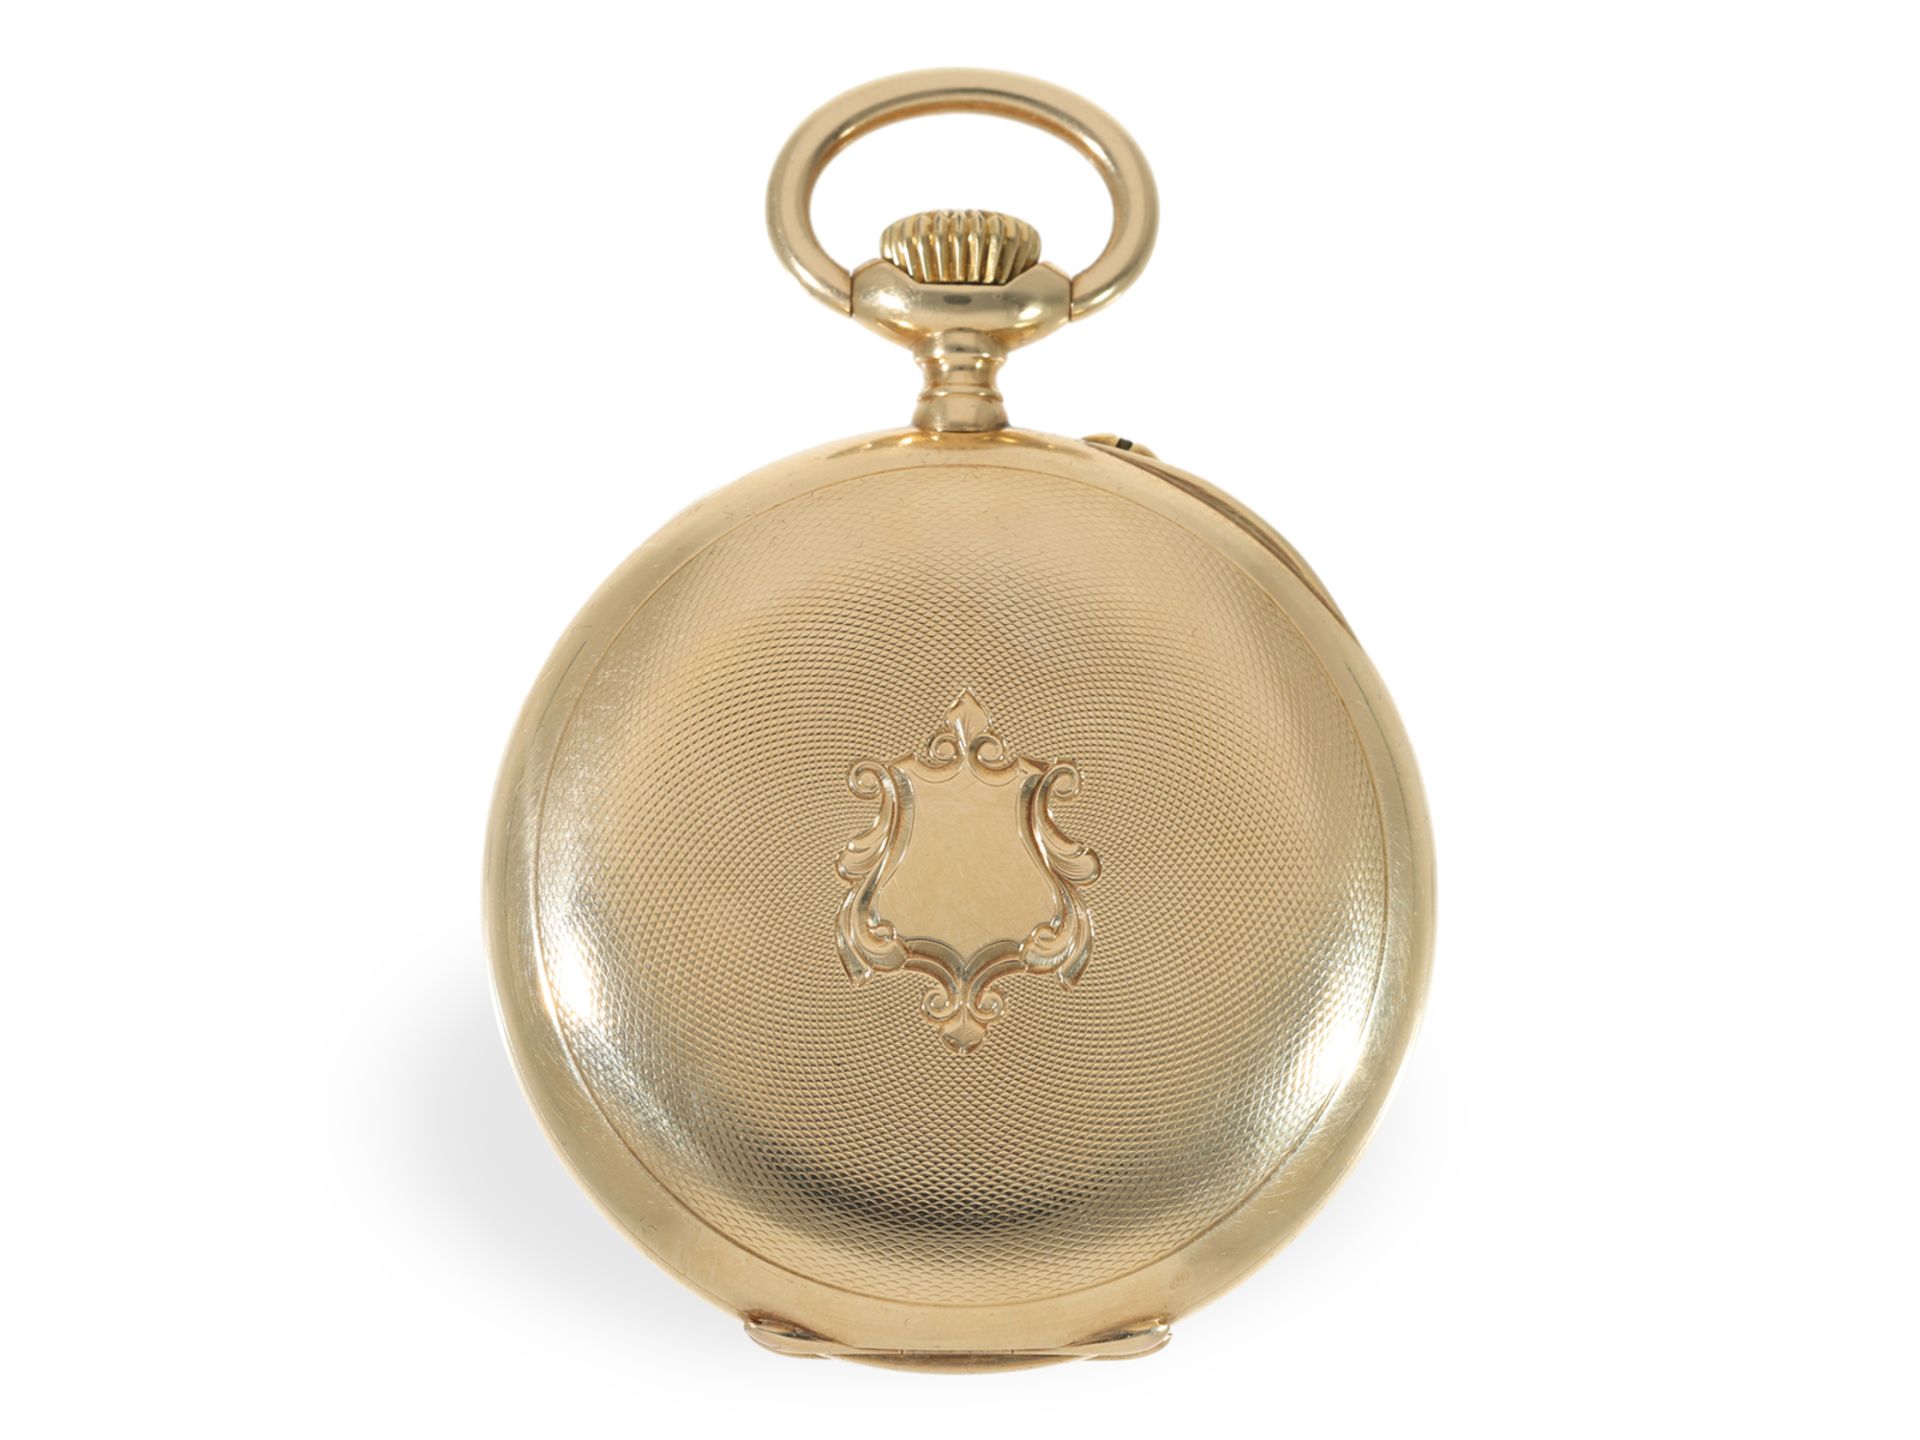 Pocket watch: very well preserved pocket chronometer by Vacheron & Constantin, ca. 1905 - Image 2 of 6